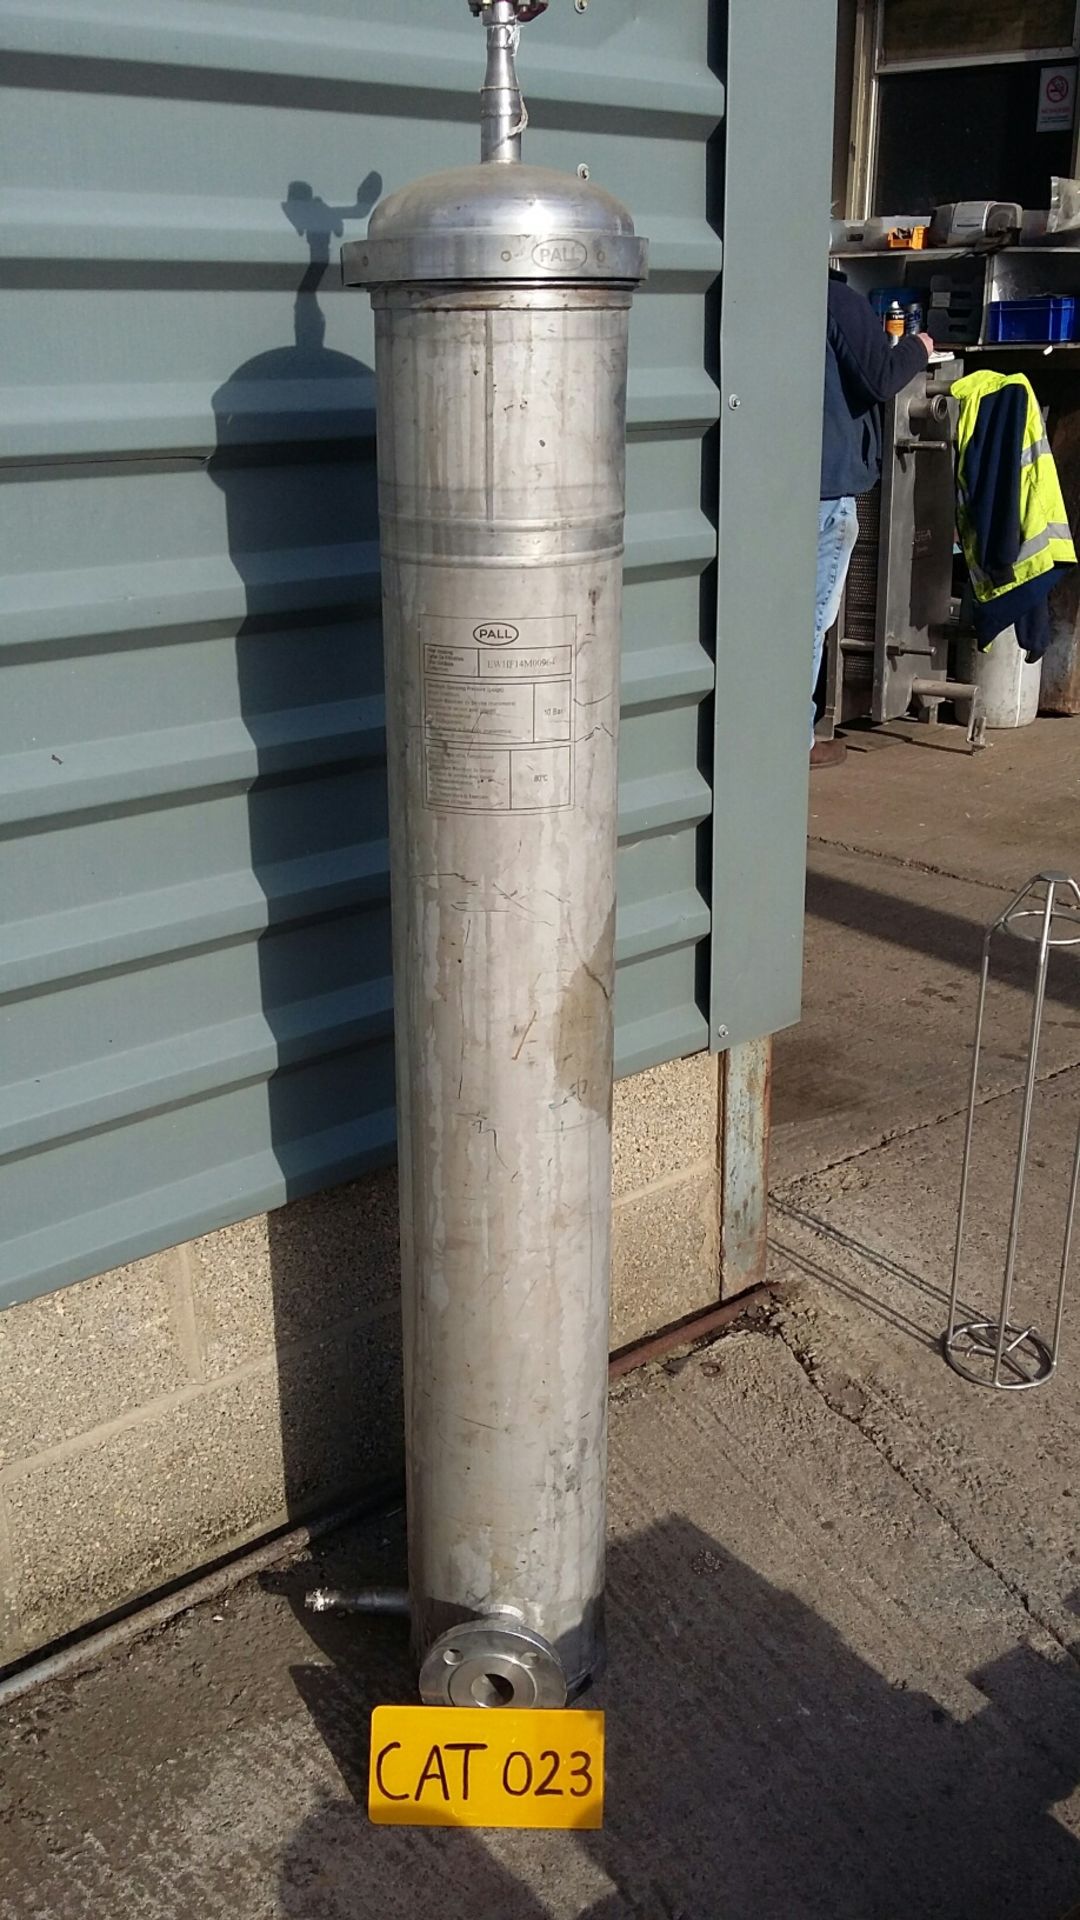 Pall Stainless Steel Inline Filter, 10 bar working